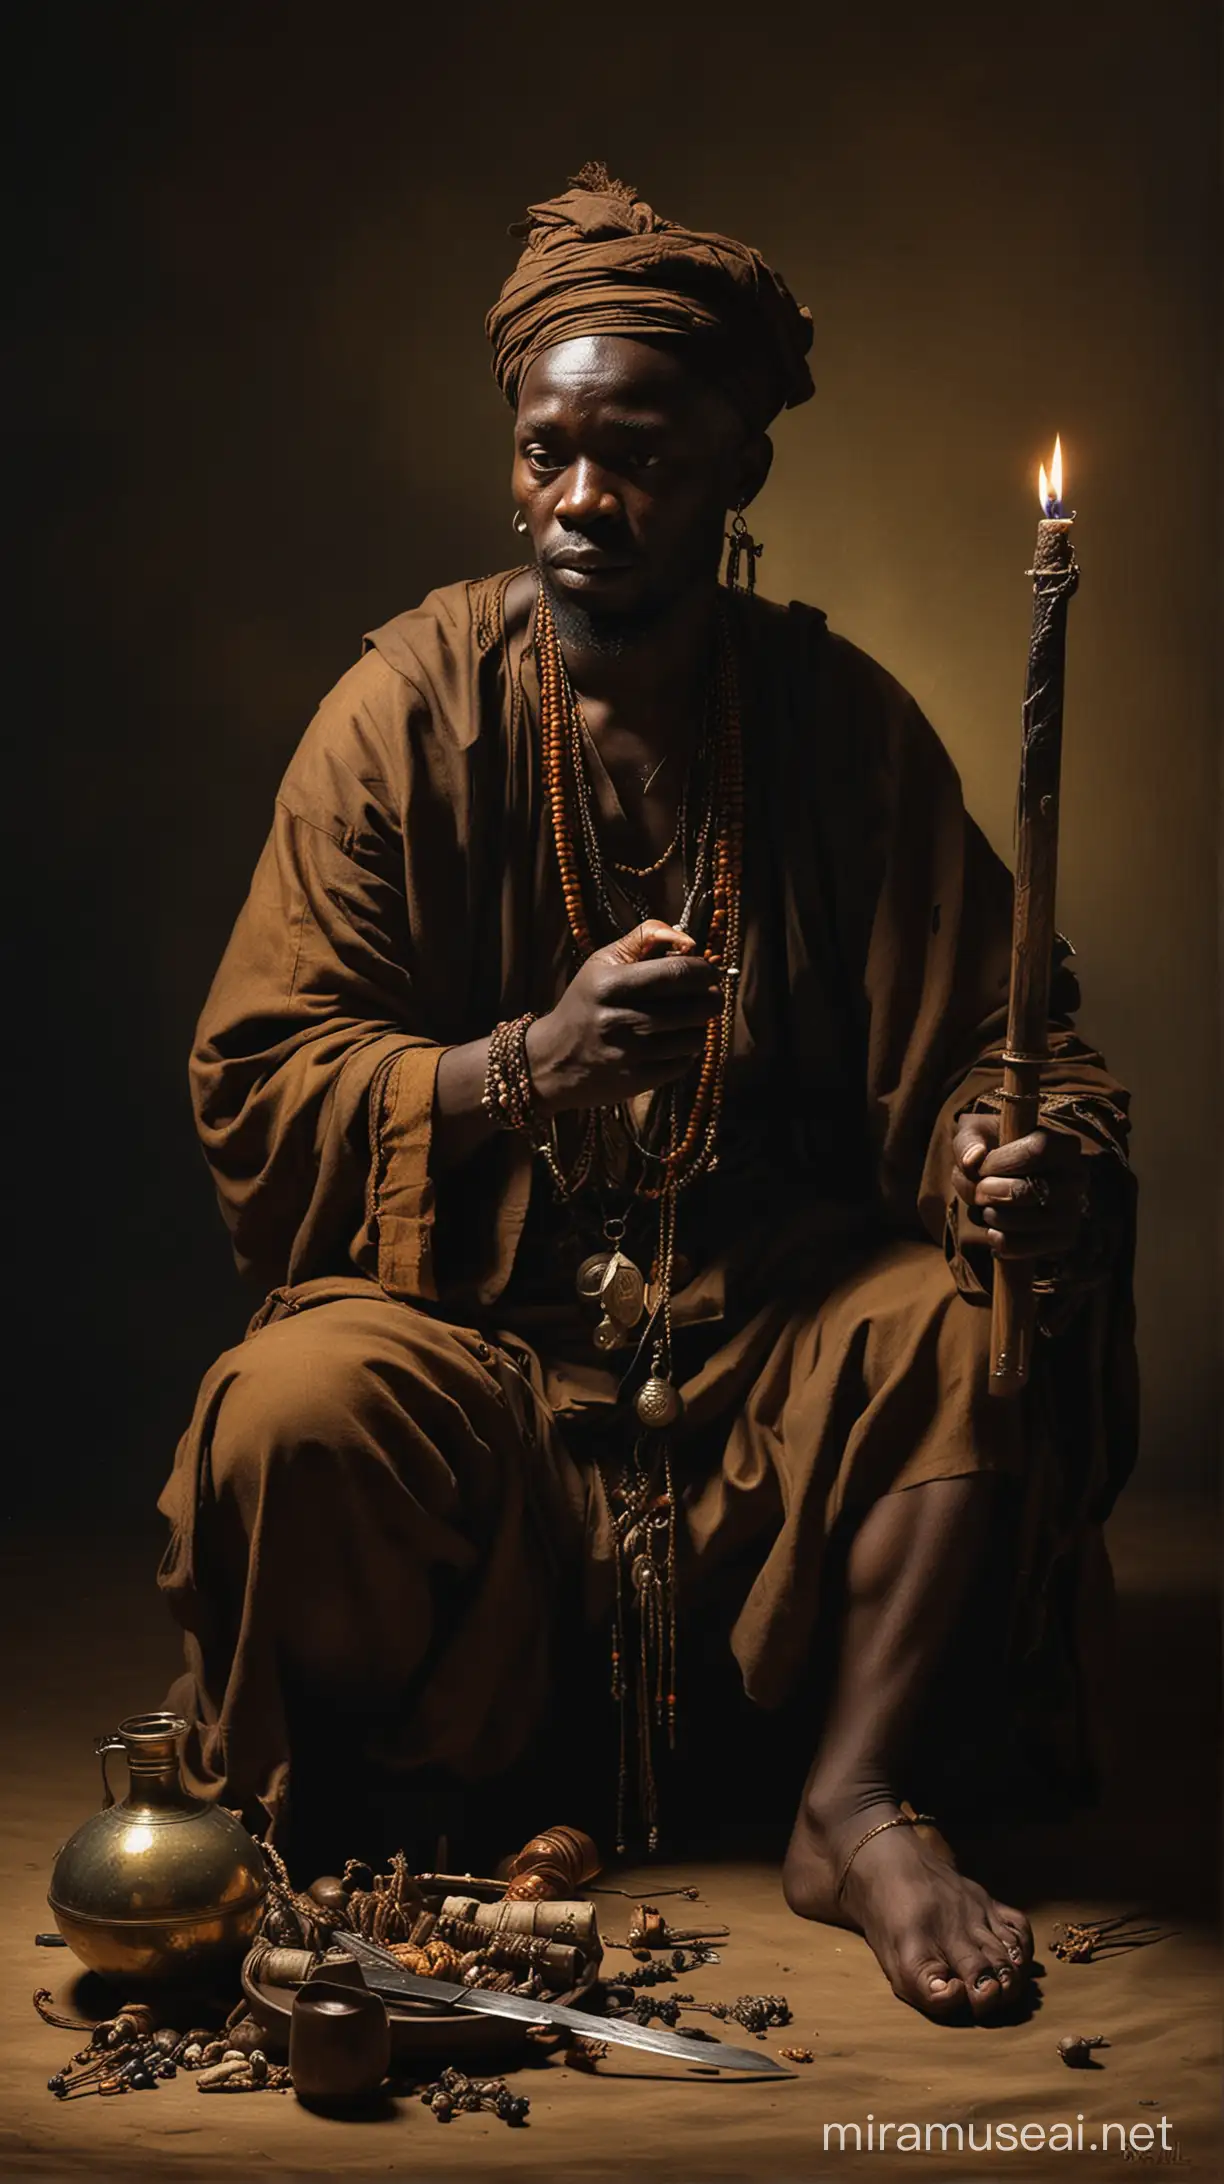 Painting that will show Africans doing a voodoo ritual with a knife and amulets and voodoo symbols. in the Rembrandt style and baroque painting. Dramatic use of light and shadow, a technique known as chiaroscuro. This creates a striking contrast between light and dark areas, often highlighting the focal point. of painting, his compositions often convey a deep emotional or narrative intensity, Rembrandt's color palette is typically rich but subdued, with earthy tones and warm colors, his brushwork is renowned for its expressiveness and texture, ranging from soft to Finely detailed in focus areas. to looser and more impressionistic elsewhere,